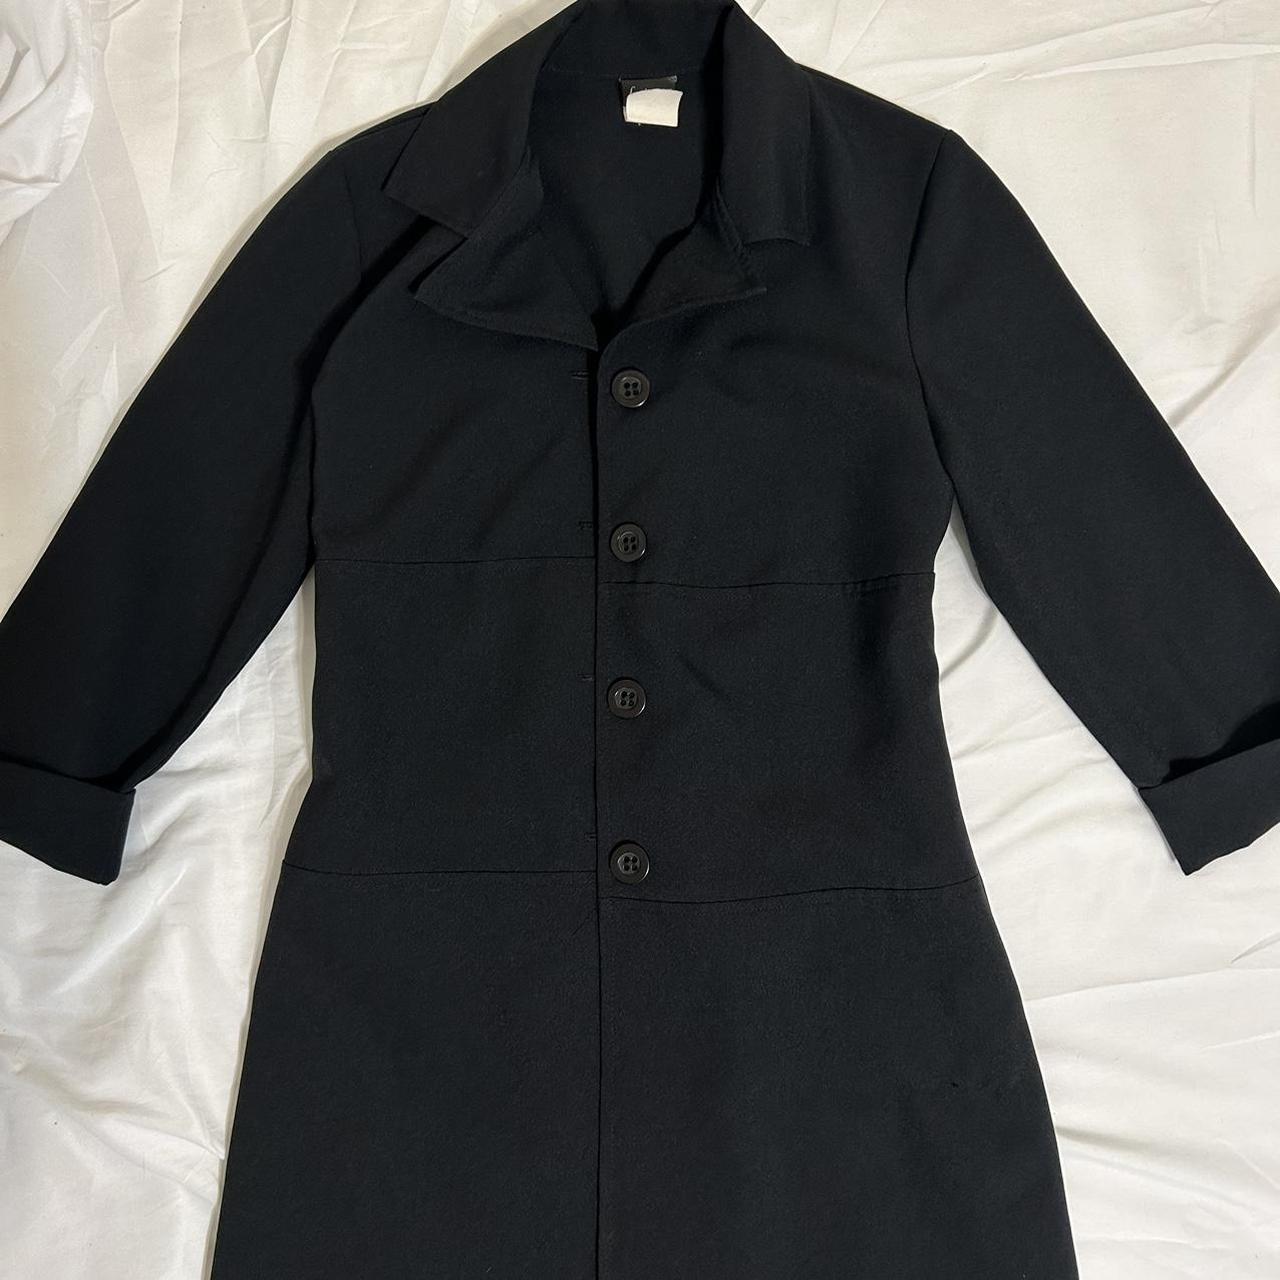 fredericks of hollywood trench coat 🖤 size 4 & fits... - Depop